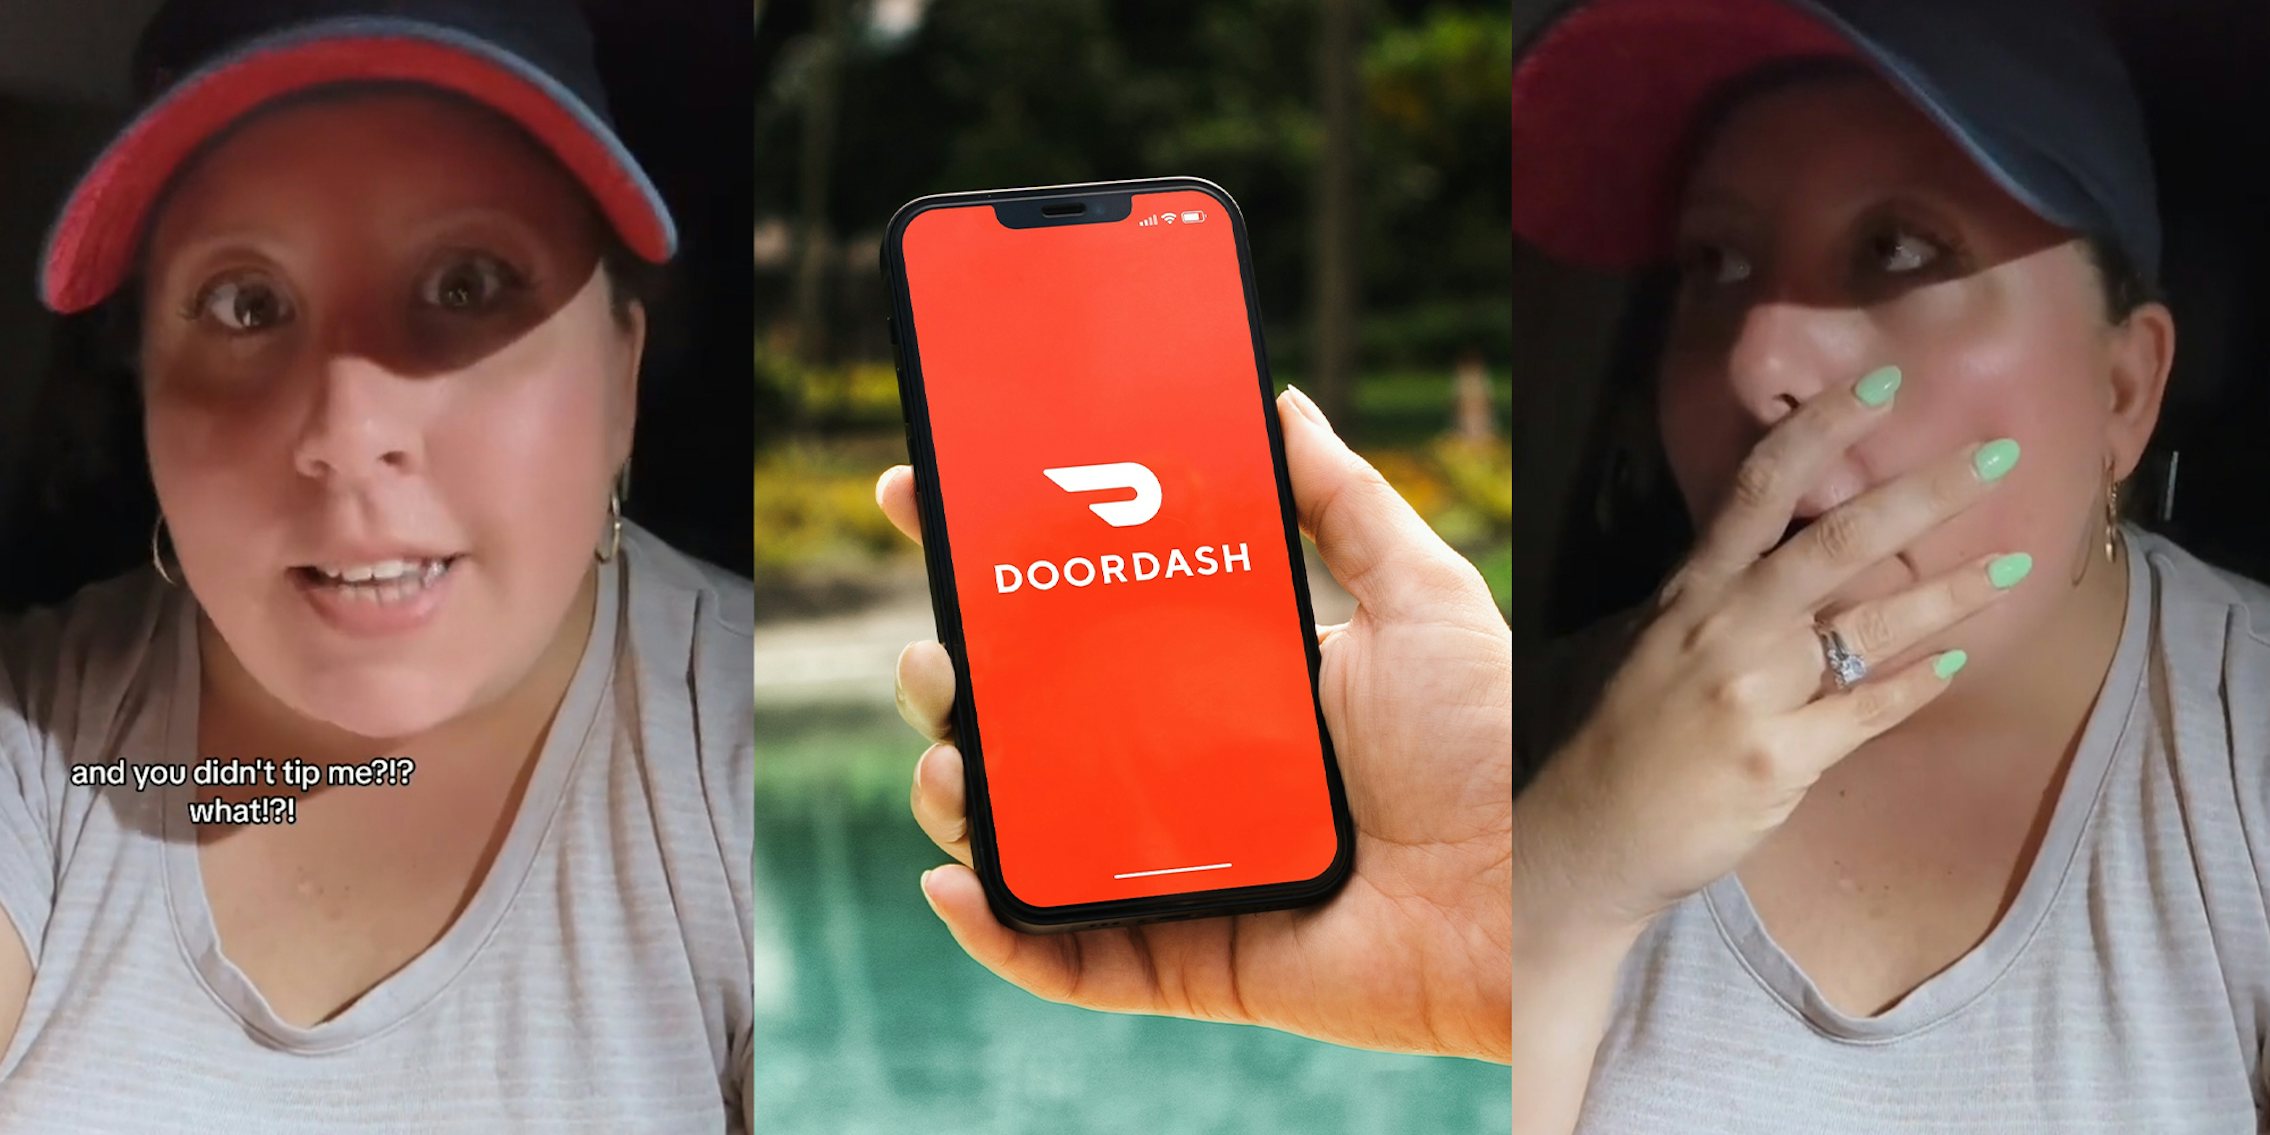 DoorDash driver with asthma climbed multiple flights of stairs to deliver order